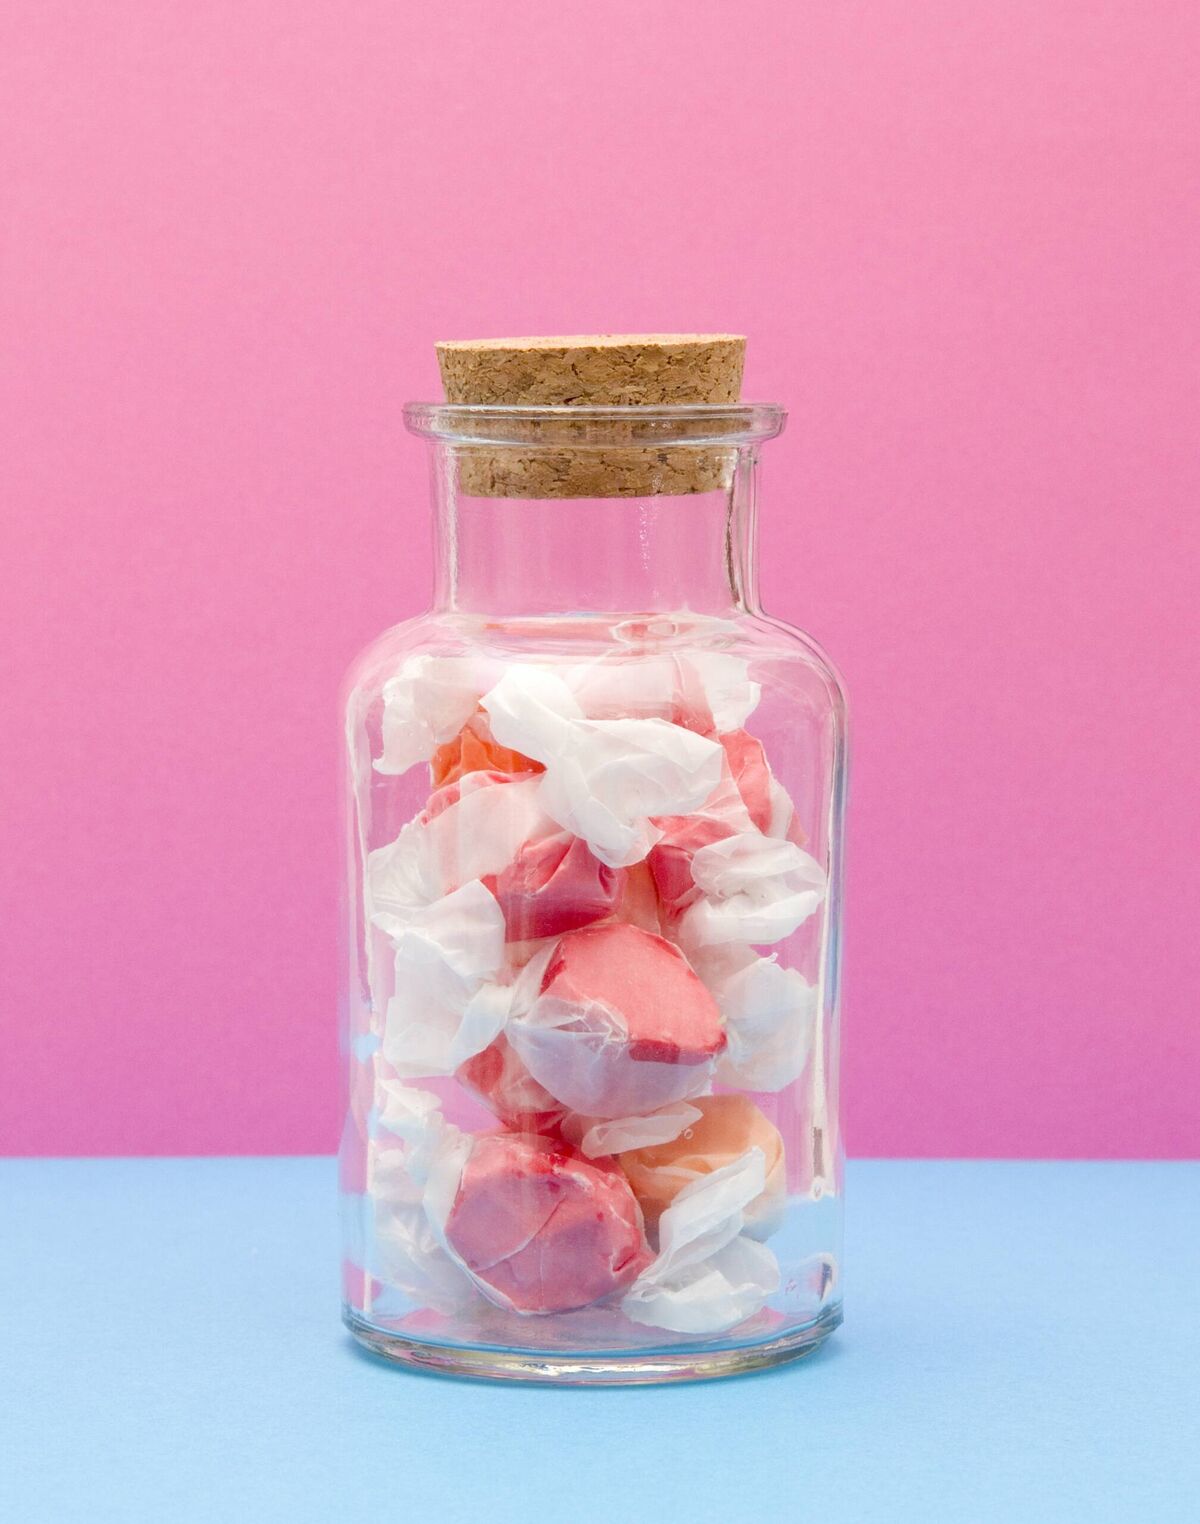 saltwater taffy in a jar with a pink background